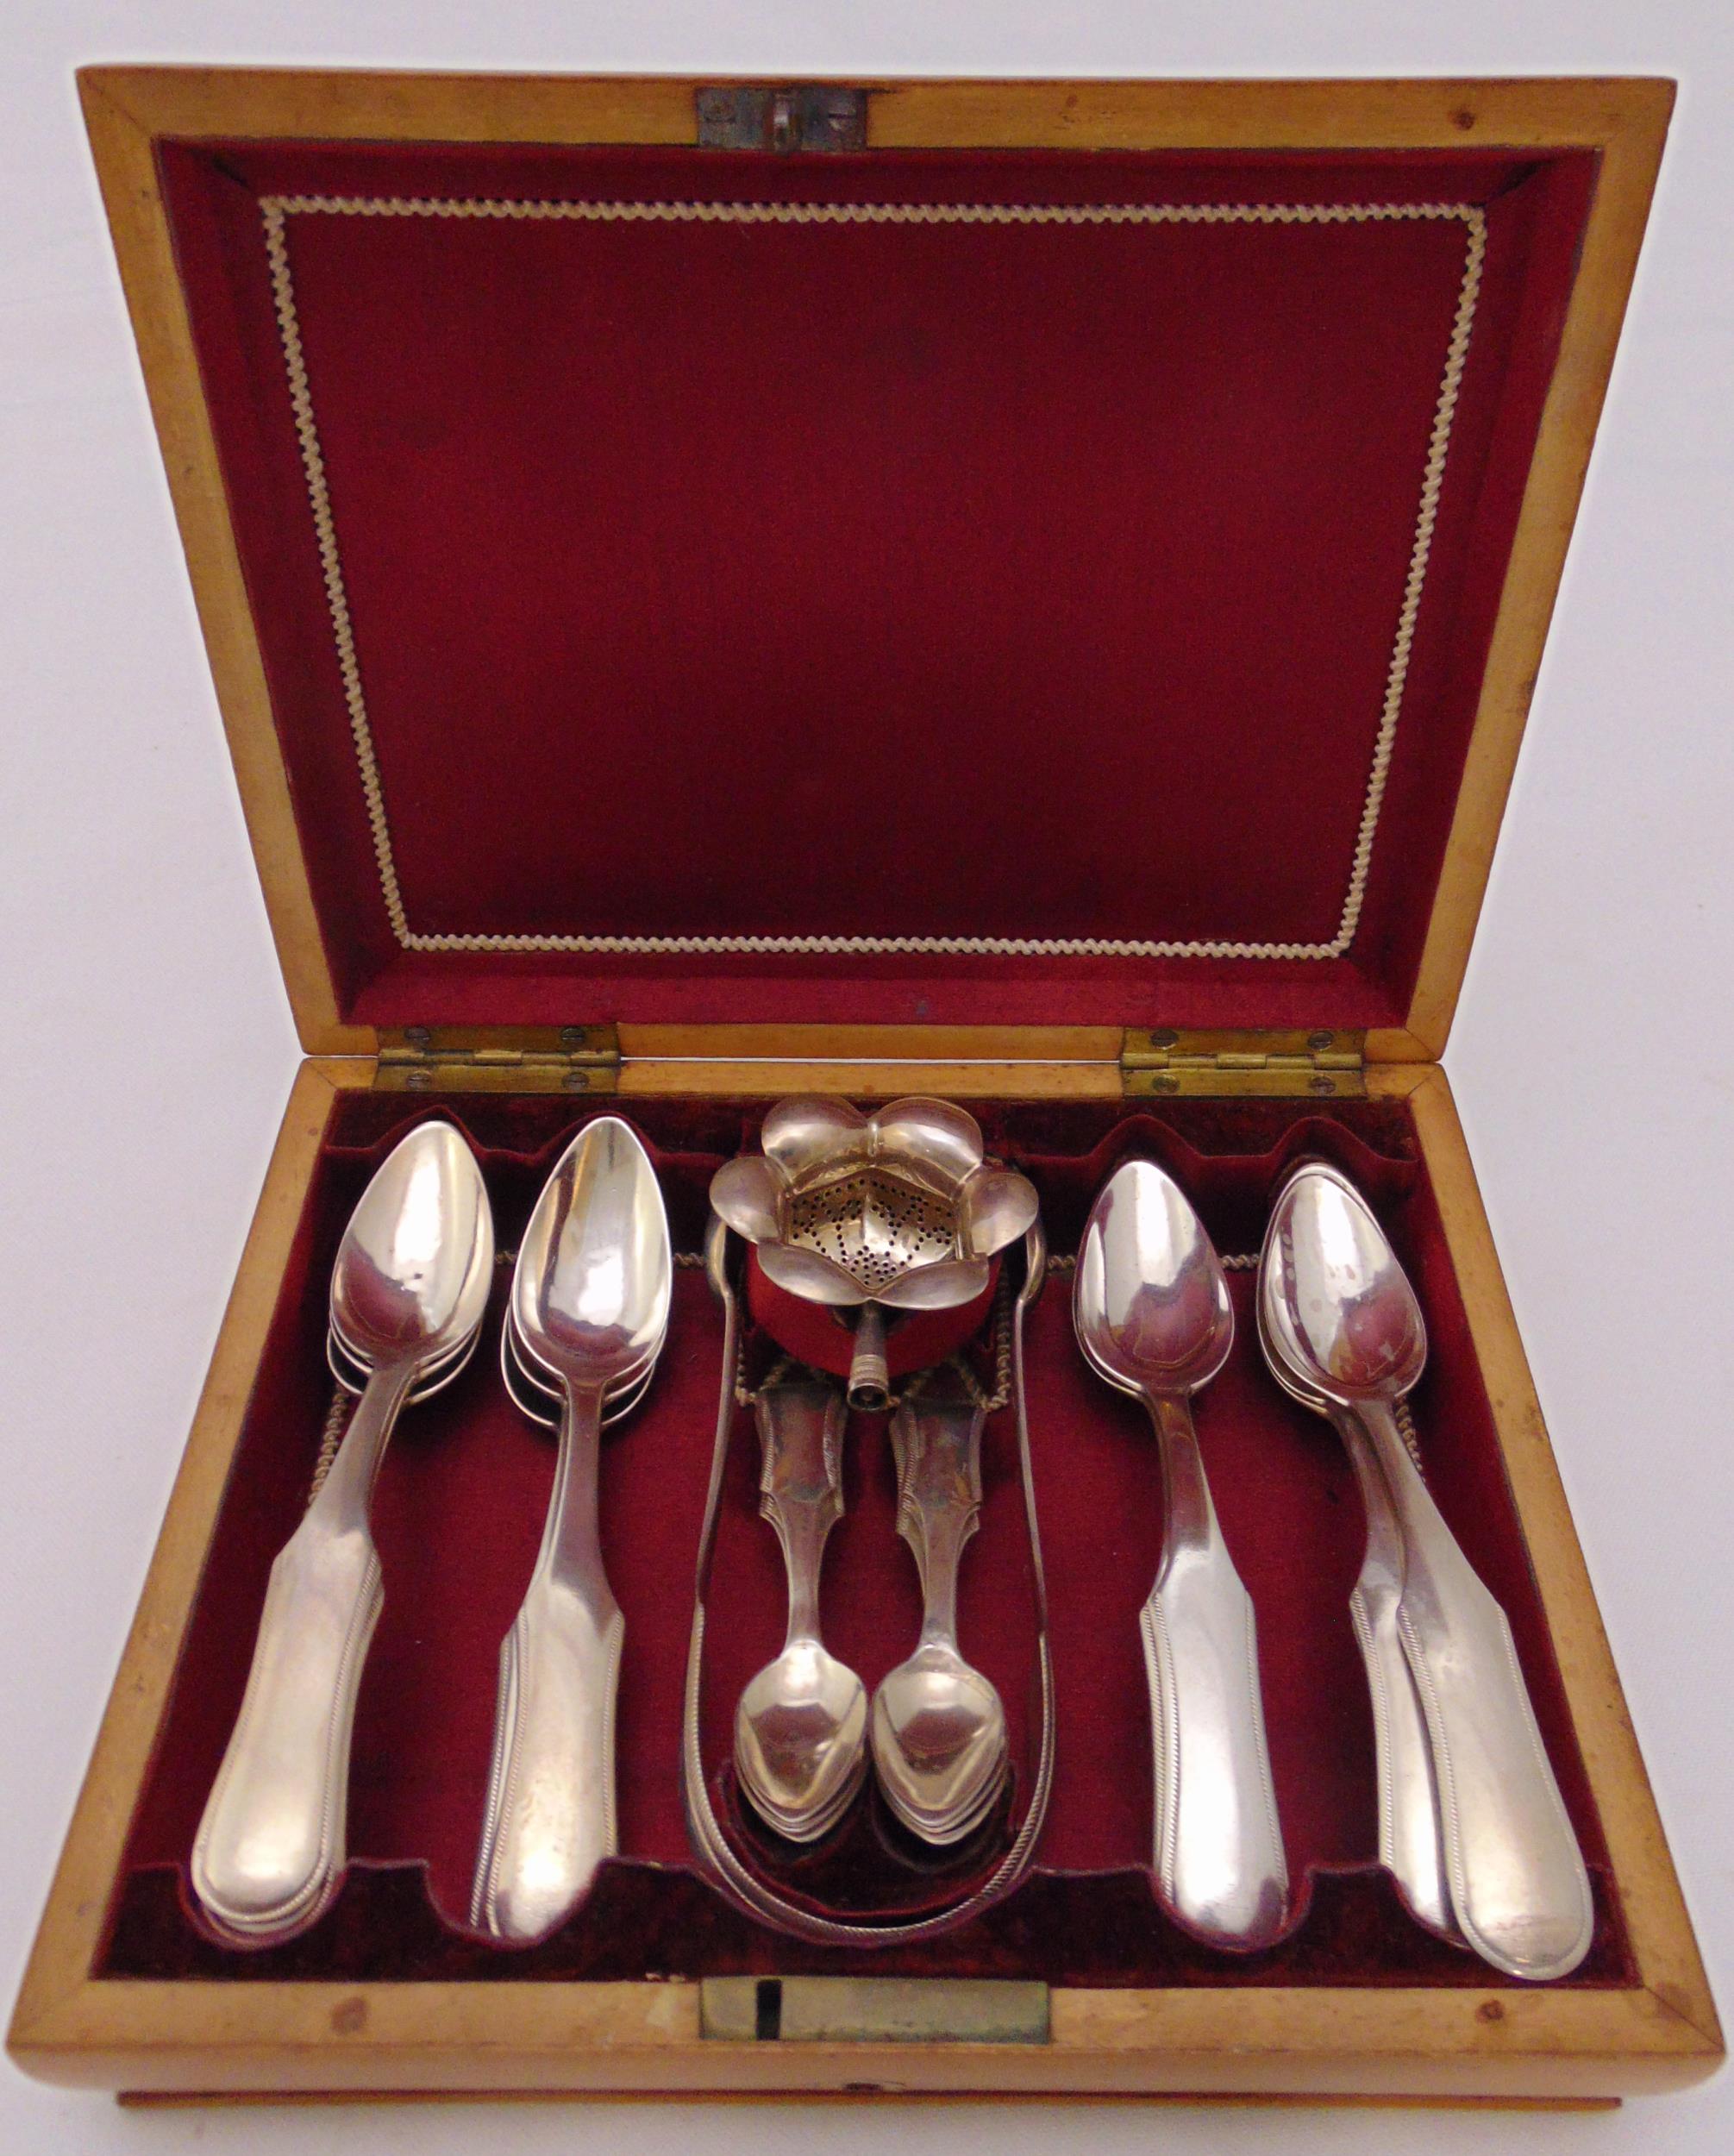 Eleven Dutch silver teaspoons, six matching coffee spoons, a pair of sugar tongs and a sifter